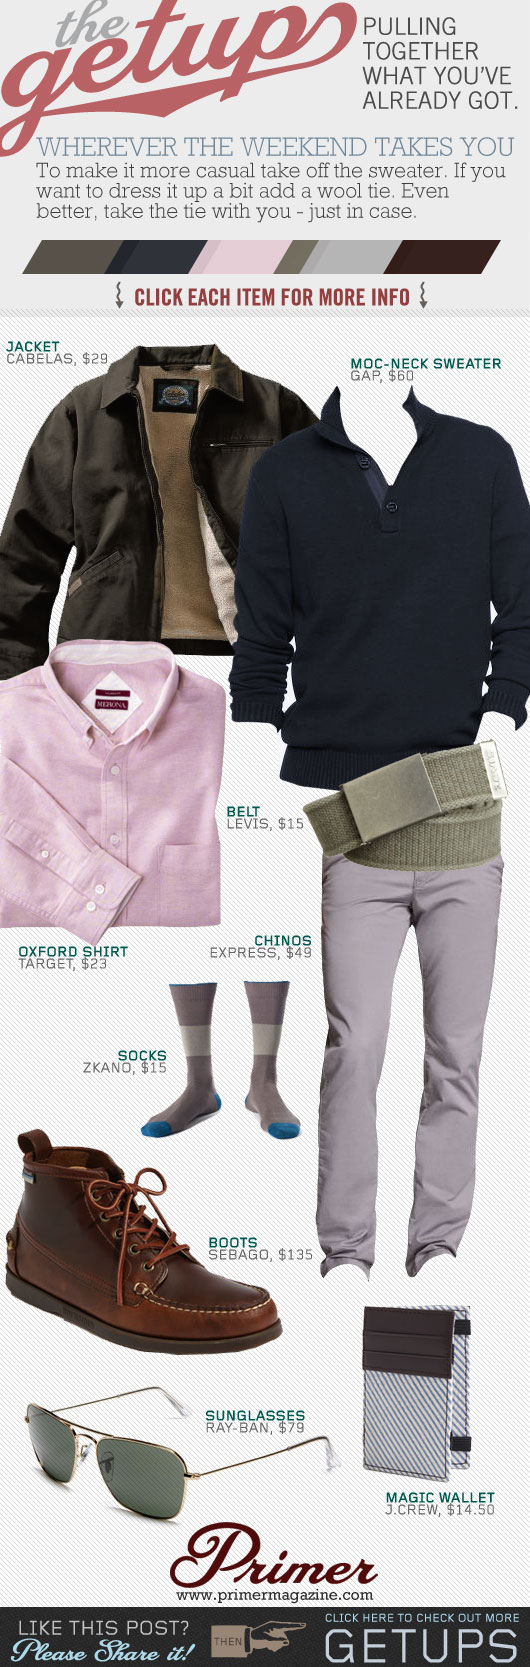 Getup - Wherever the weekend takes you - green jacket, blue sweater, pink shirt, gray pants